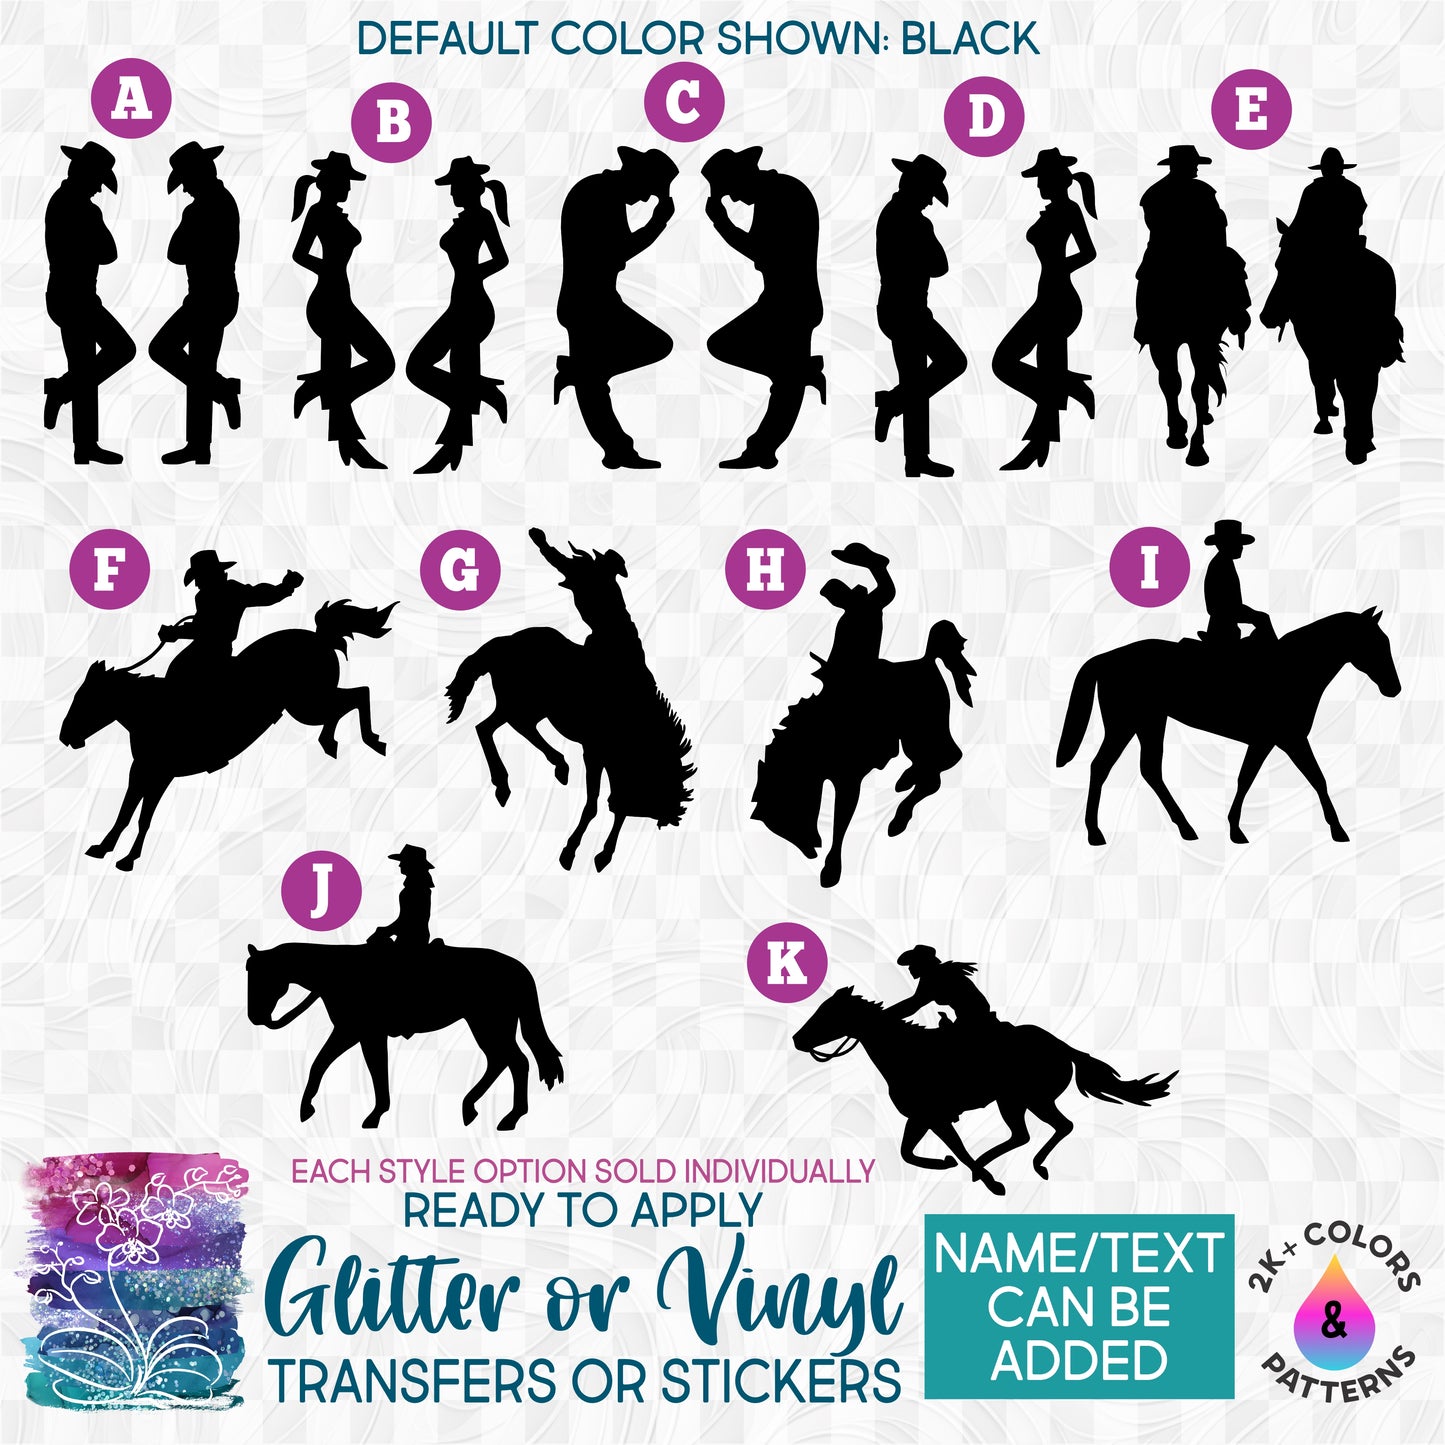 (s036-1) Western Cowboy Cowgirl Rodeo Glitter or Vinyl Iron-On Transfer or Sticker